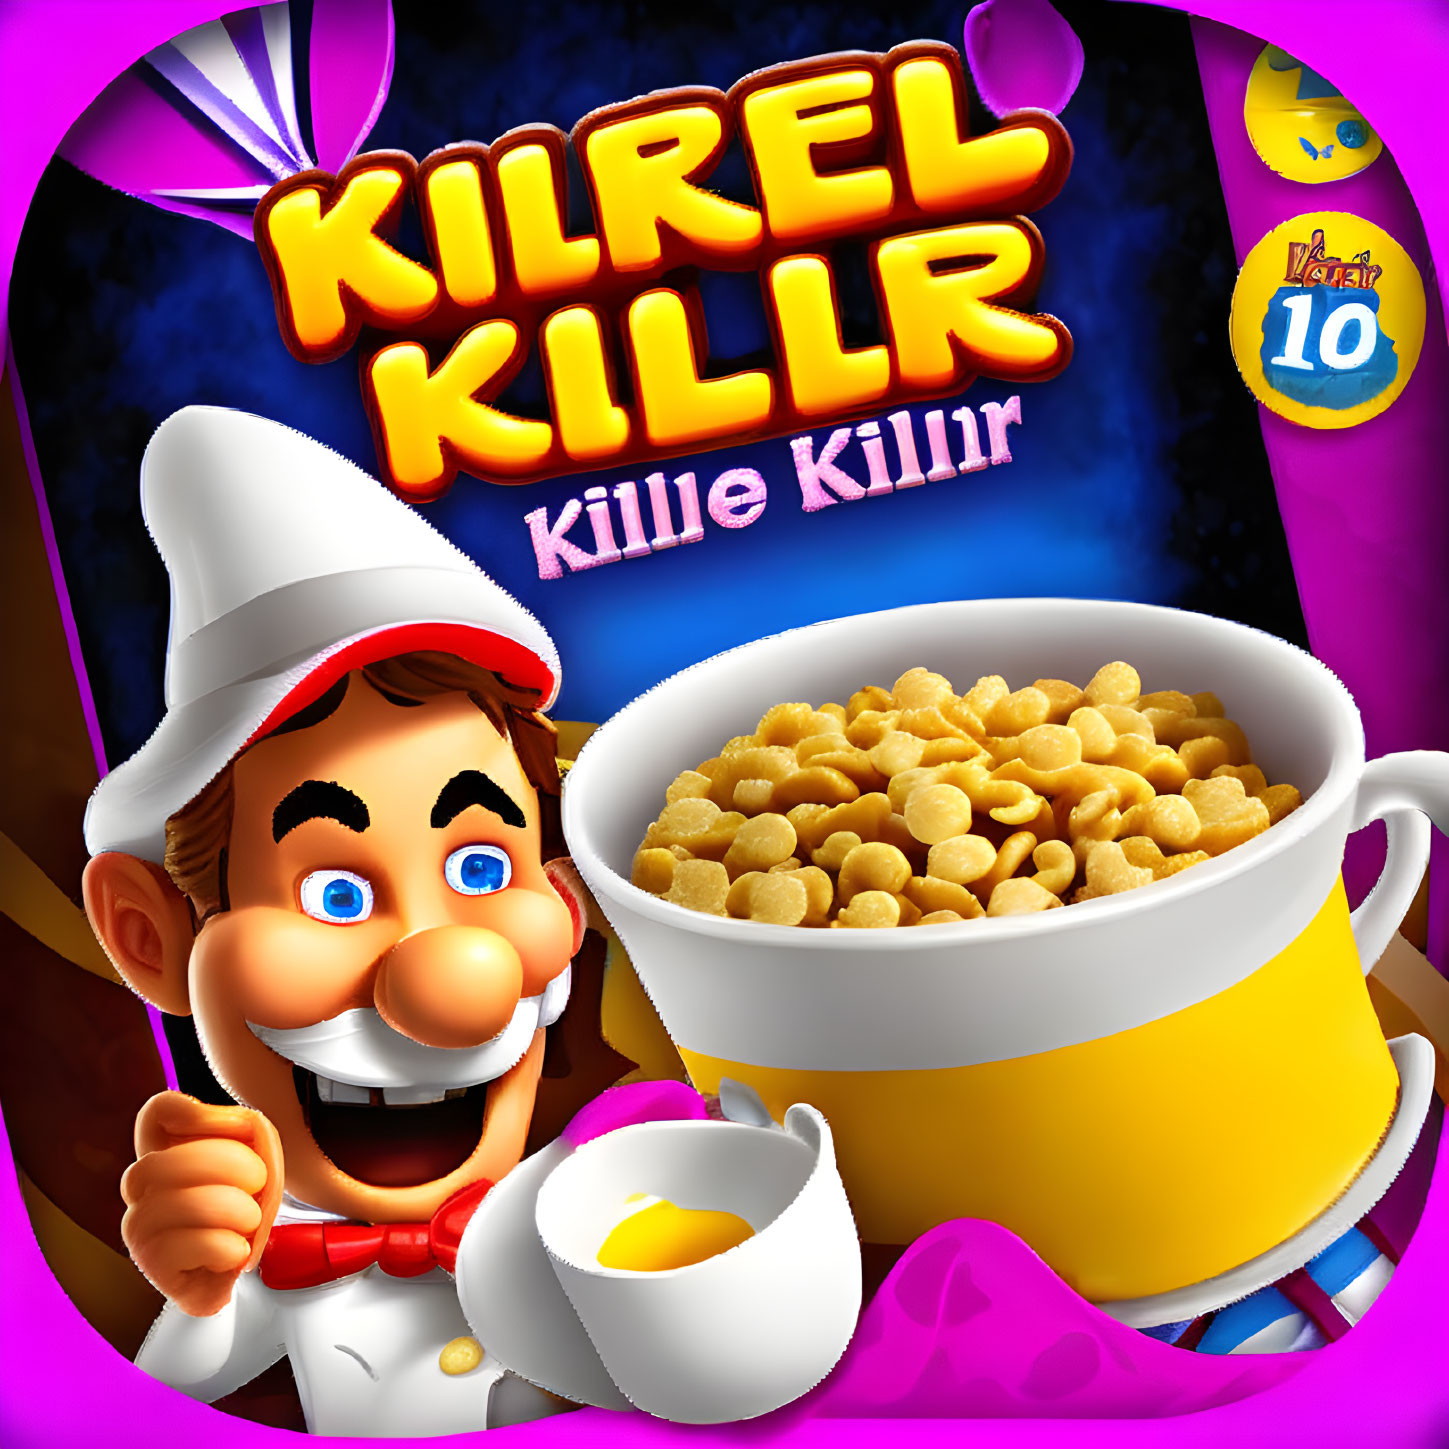 Colorful Cereal Box Design with Chef, Spoon, Cup of Cereal, Egg, and 